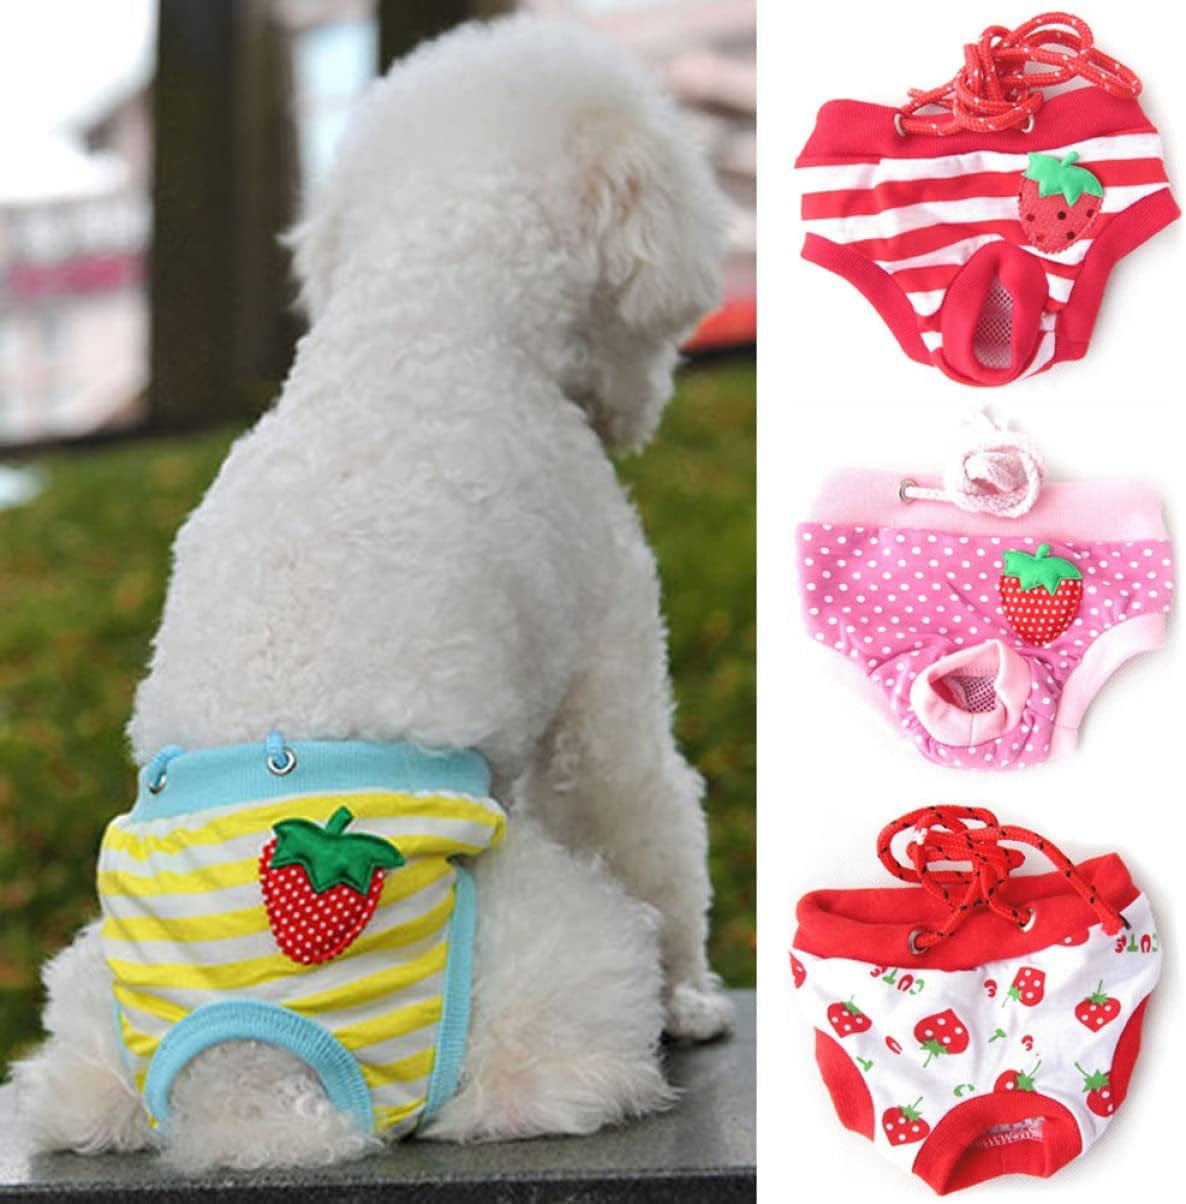 Balacoo with Shorts for Diaper Panties Pet, Male Cotton Dot